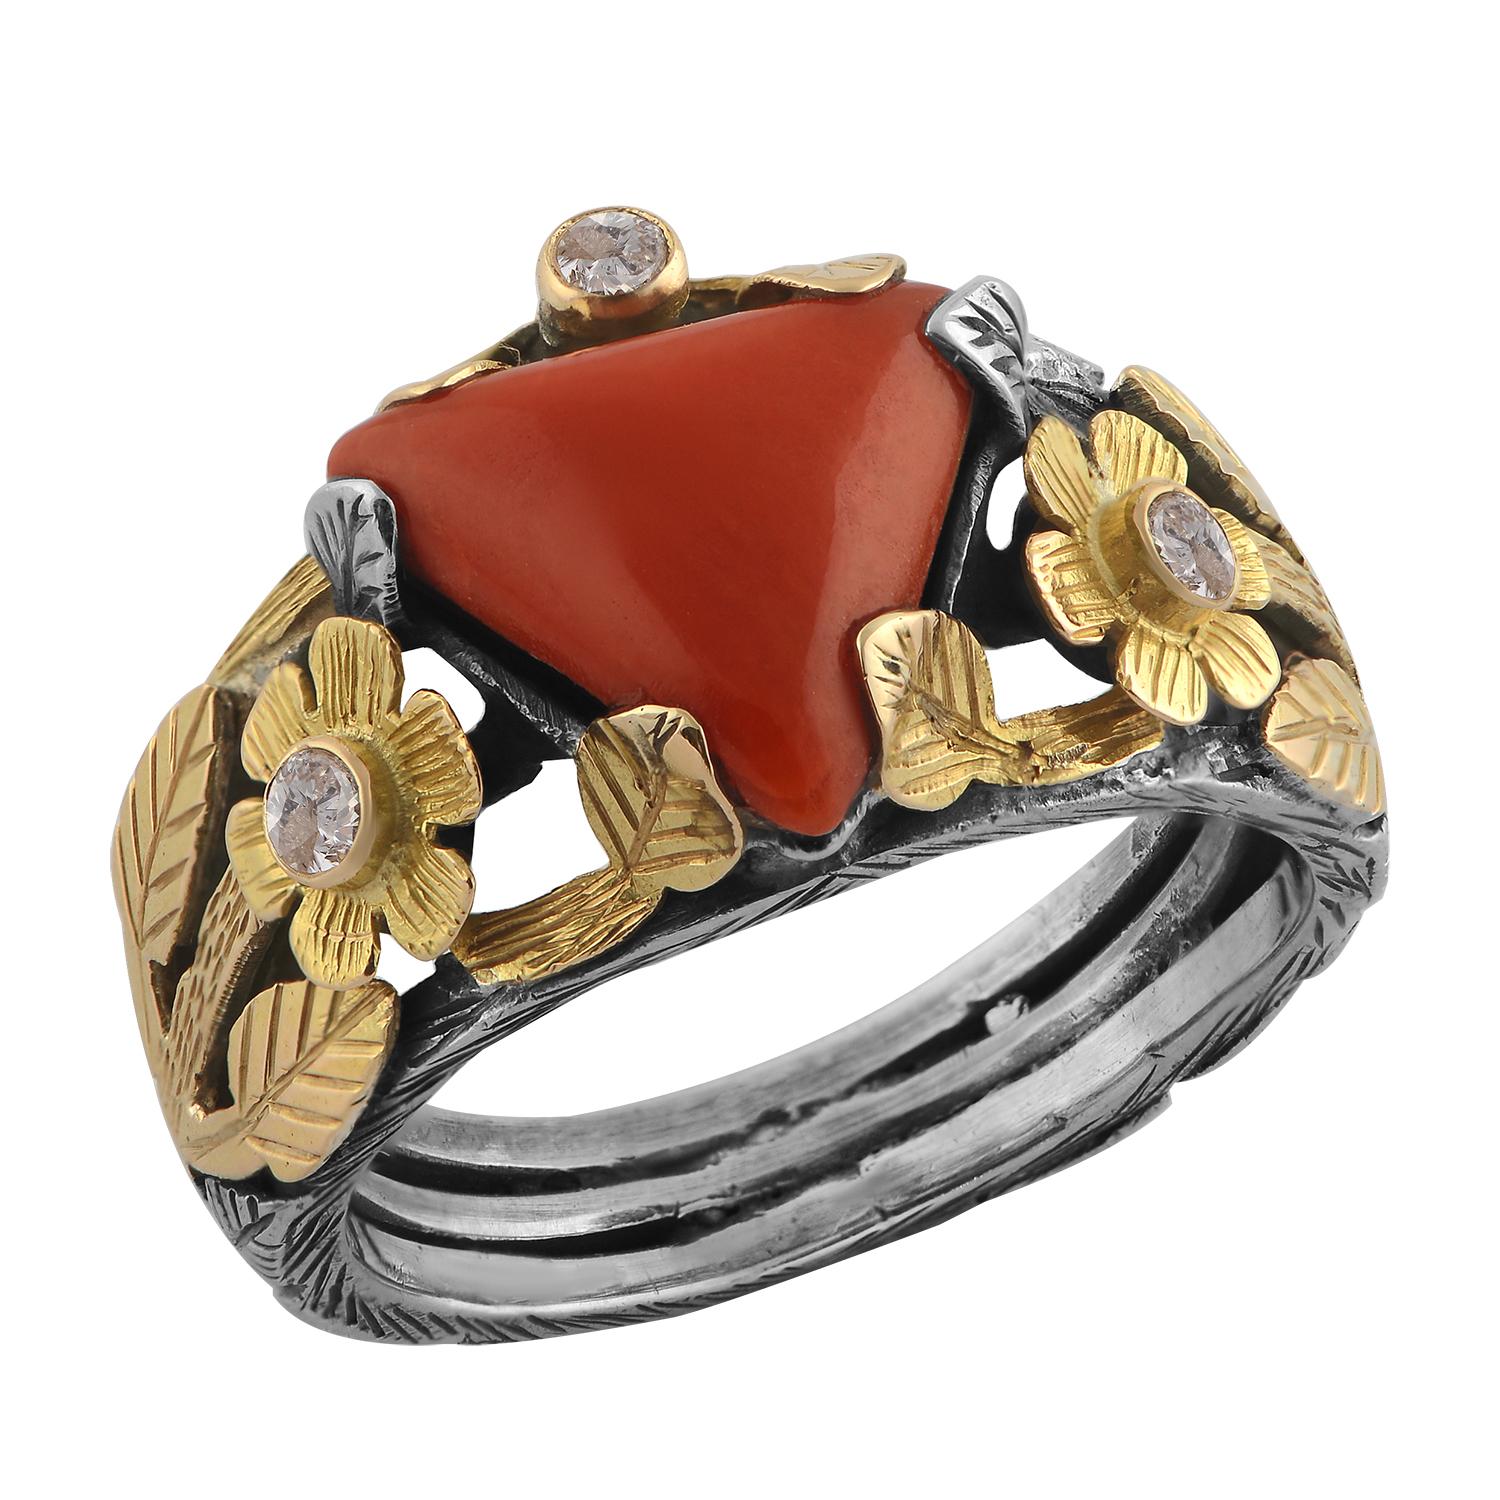 

This beautiful one of a kind ring has been handmade in our workshops. It has exquisite hand engraving work on it using 18kt gold and oxidized sterling silver botanical motifs. The ring is embedded with coral and diamonds.

It has a matching